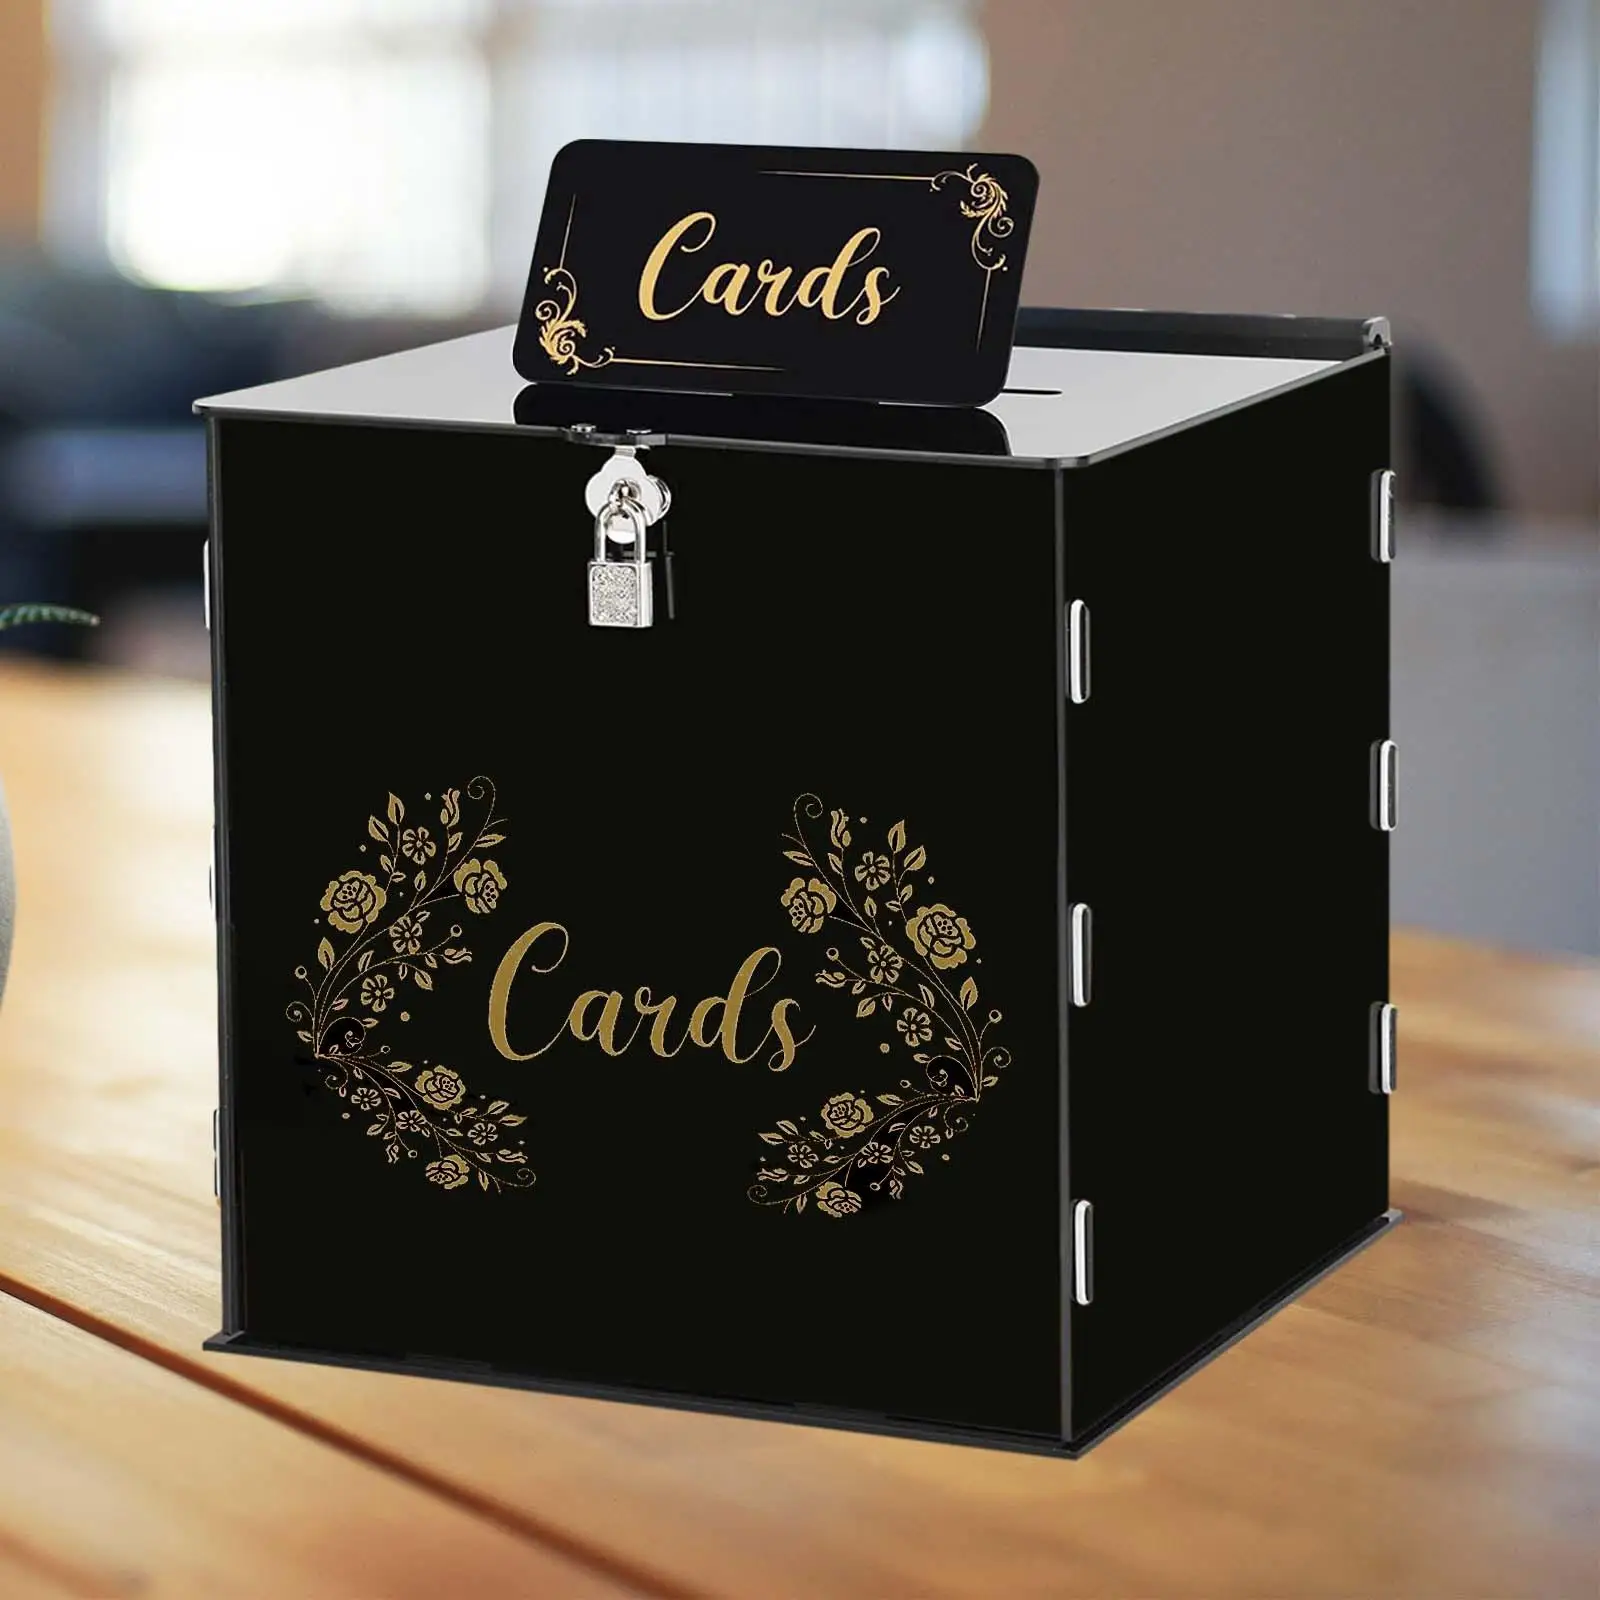 Acrylic Wedding Cards Box Gift Card Box Money Gift Holder Box with Lock for Parties Graduation Events Celebration Decoration